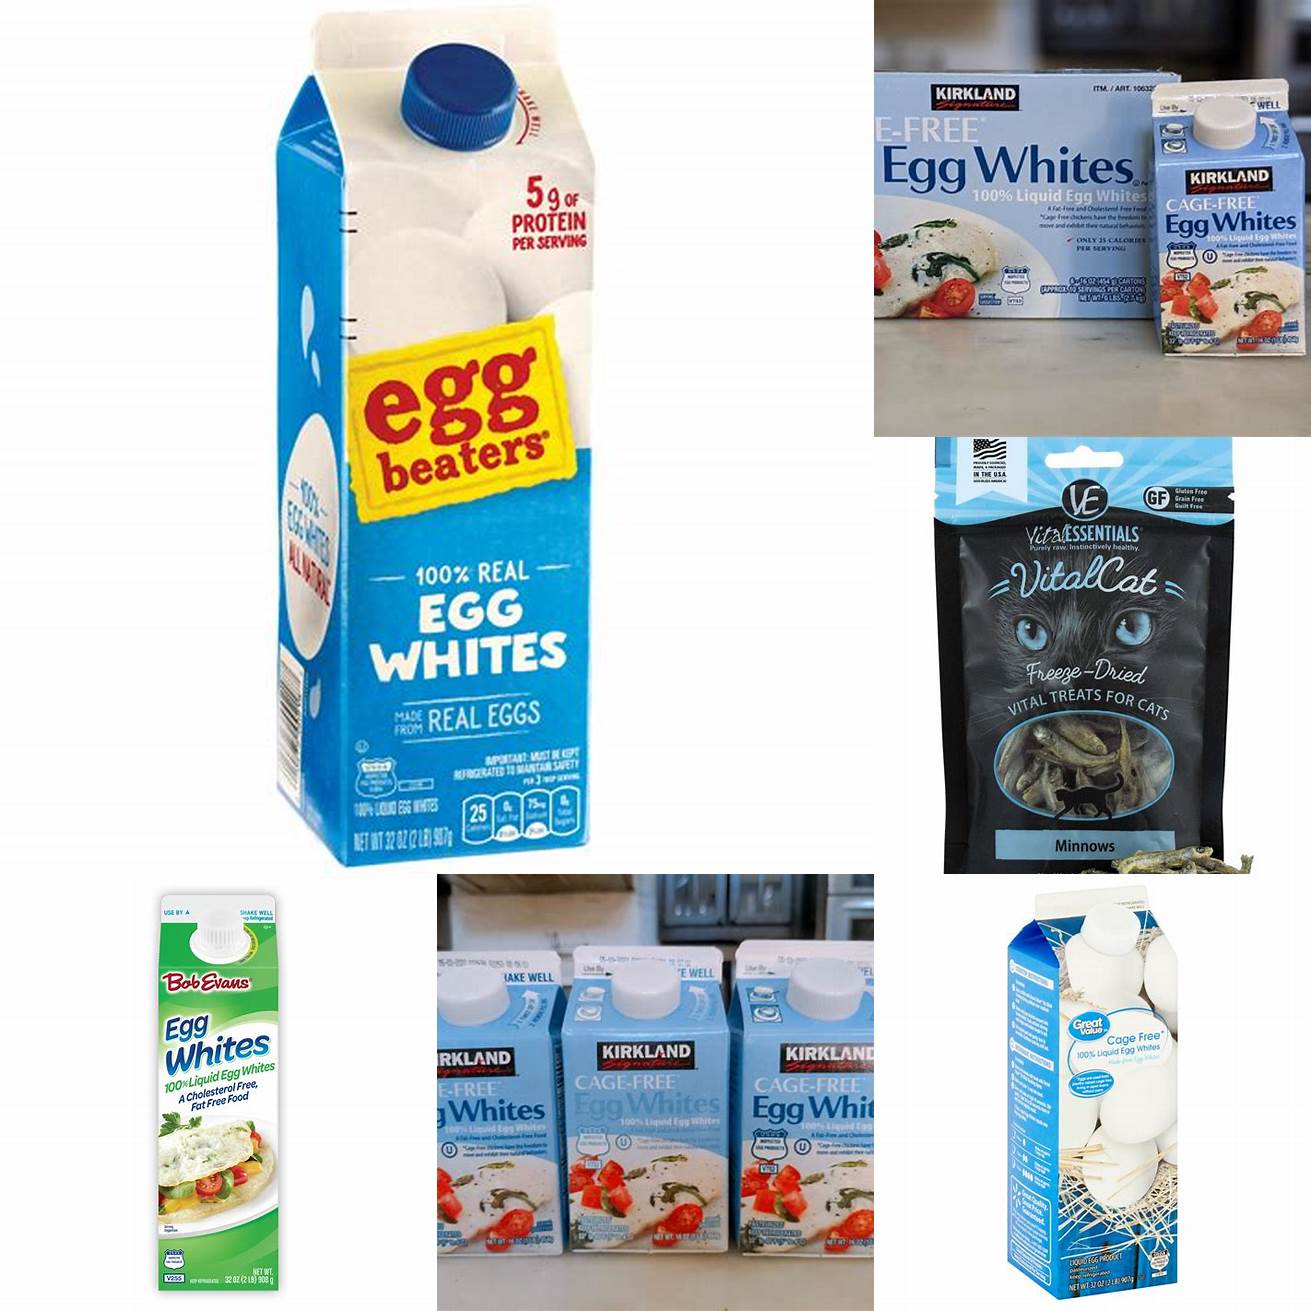 Egg whites can be a good alternative to commercial cat treats